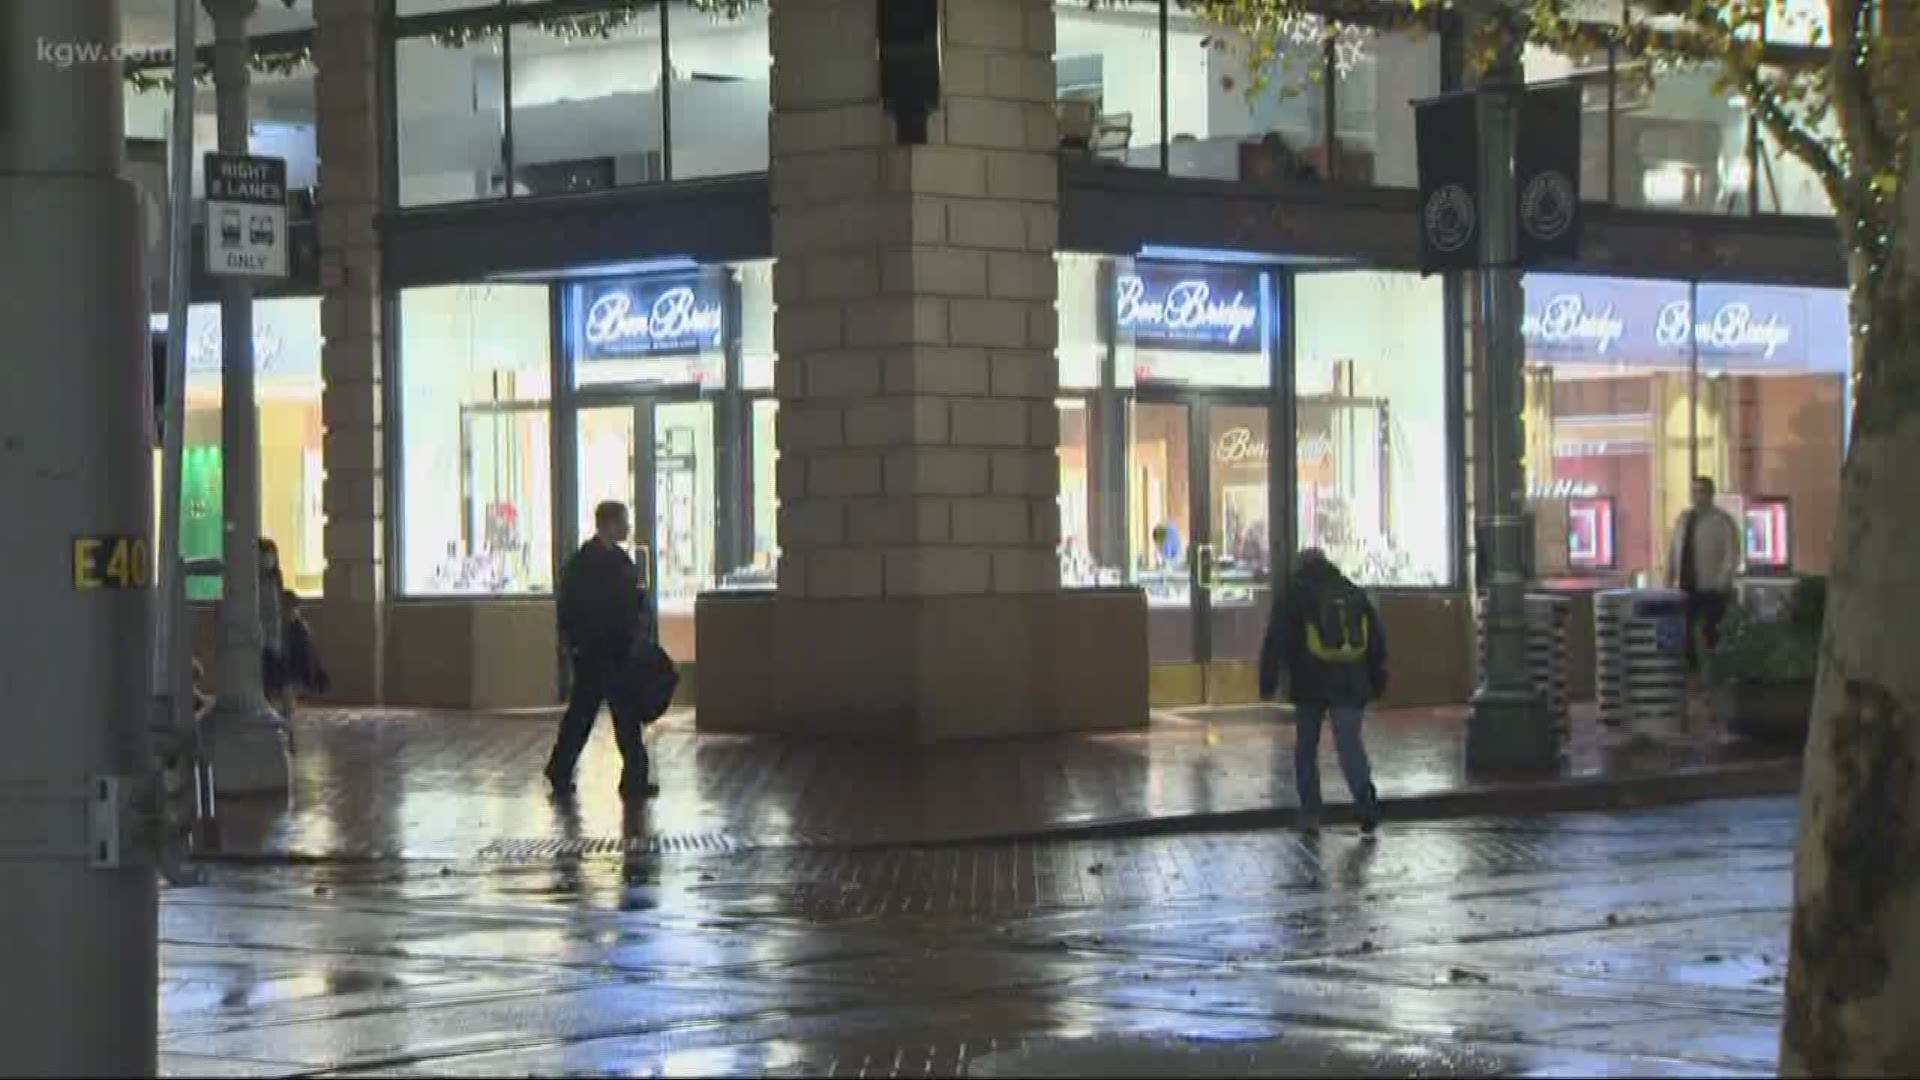 Portland addresses enhanced safety measures downtown for holiday shoppers.